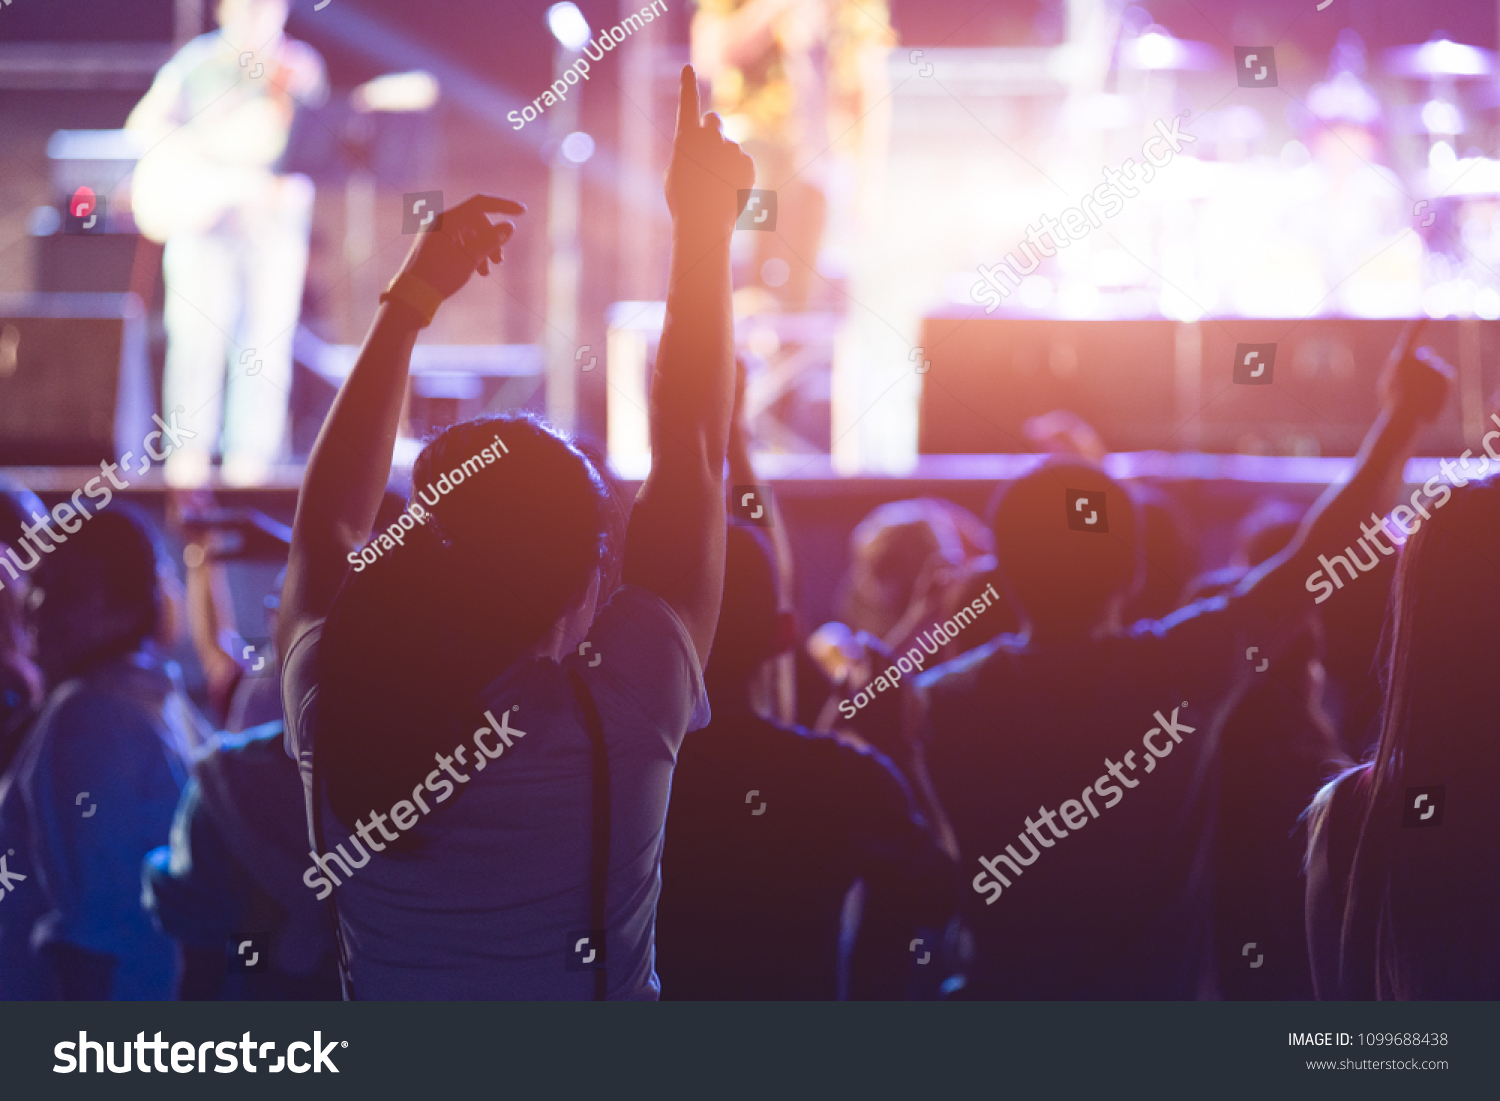 Audience People Event Stage Festival Music Stock Photo 1099688438 ...